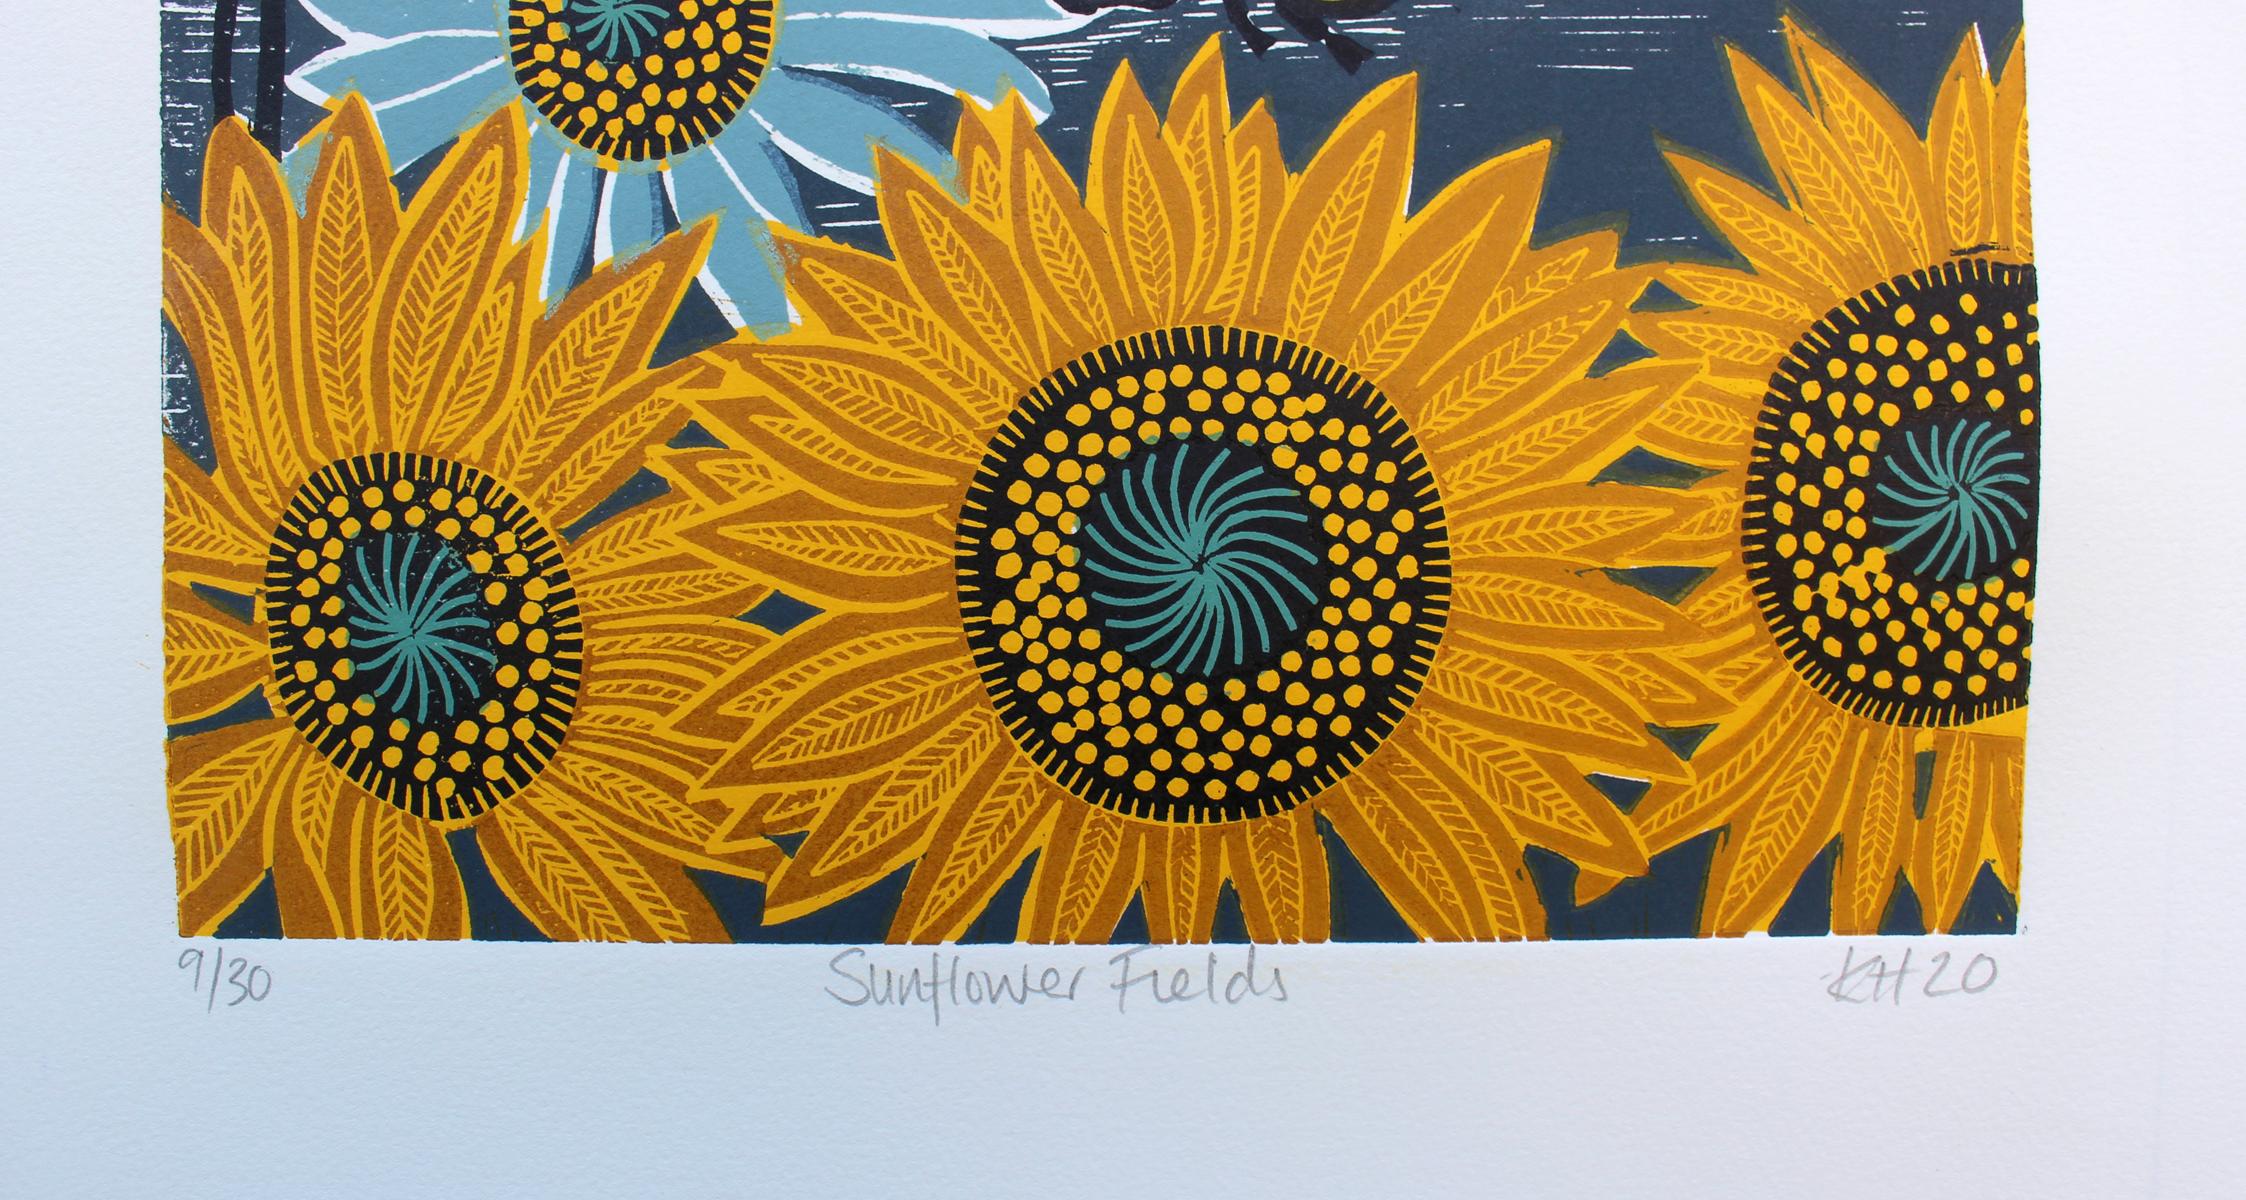 Kate Heiss
Sunflower Fields
Linocut
Edition of 30
Image Size 30 x 30cm
Mounted size 40x 40cm
Oil based inks on 300GSM Soft white Somerset Velvet Paper
Signed and dated on the front
Edition numbers may vary from the photo.
Sold Unframed
Please note